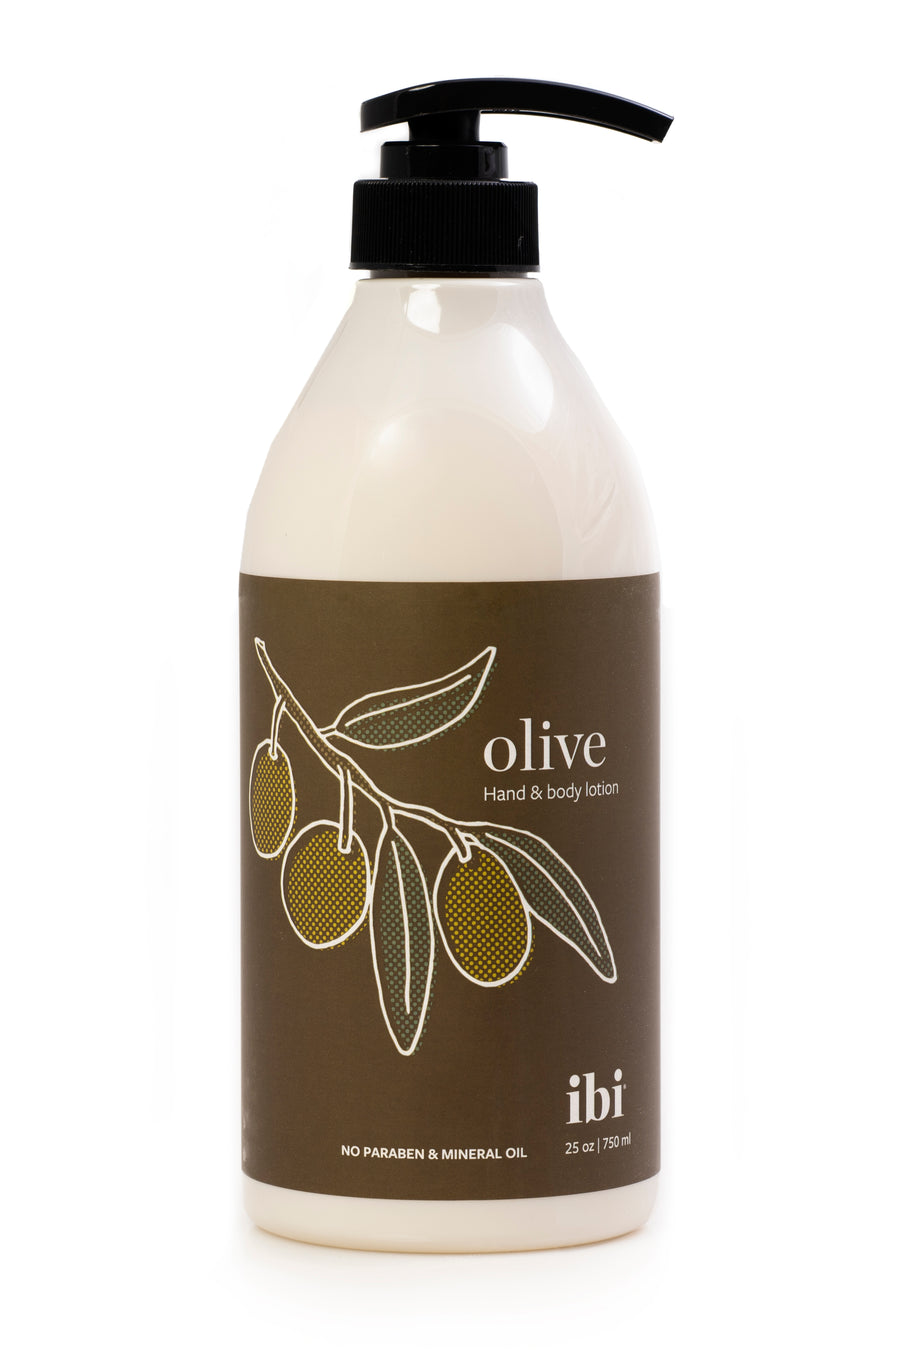 Olive hand & body lotion (750 ml)